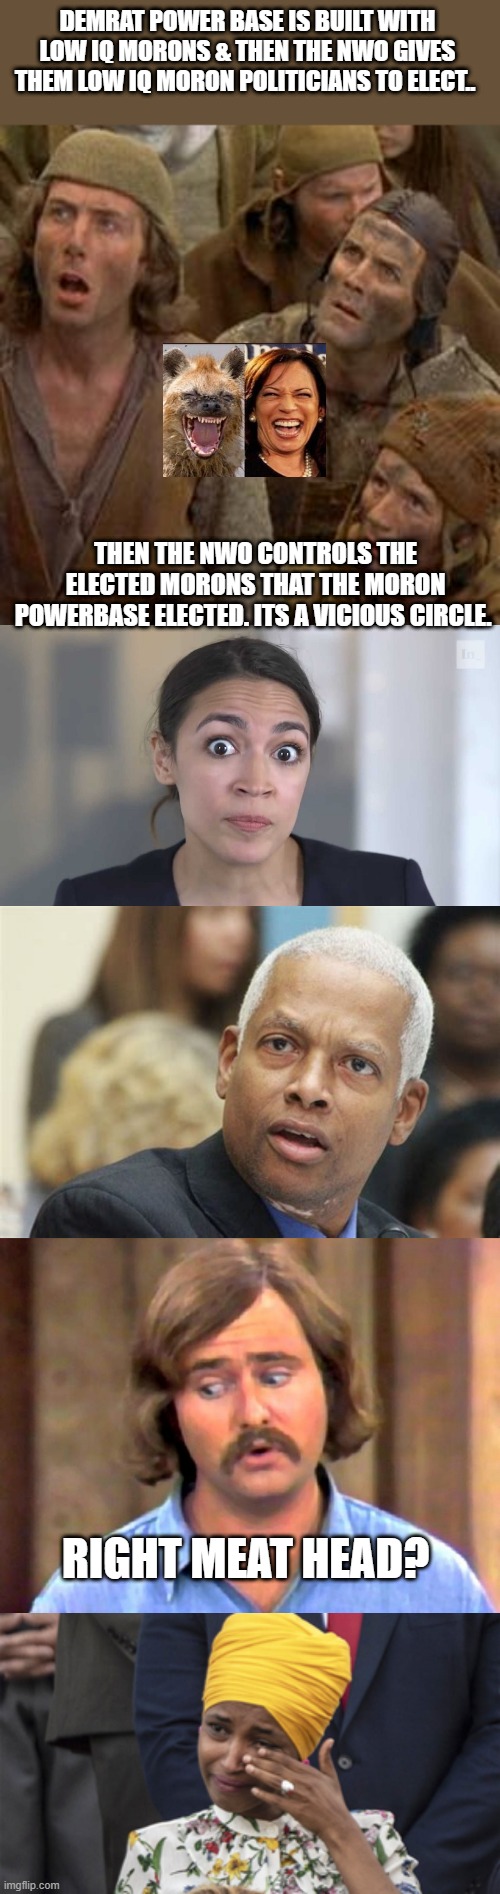 STUPID BEGAT STUPID. | DEMRAT POWER BASE IS BUILT WITH LOW IQ MORONS & THEN THE NWO GIVES THEM LOW IQ MORON POLITICIANS TO ELECT.. THEN THE NWO CONTROLS THE ELECTED MORONS THAT THE MORON POWERBASE ELECTED. ITS A VICIOUS CIRCLE. RIGHT MEAT HEAD? | image tagged in moron,aoc stumped | made w/ Imgflip meme maker